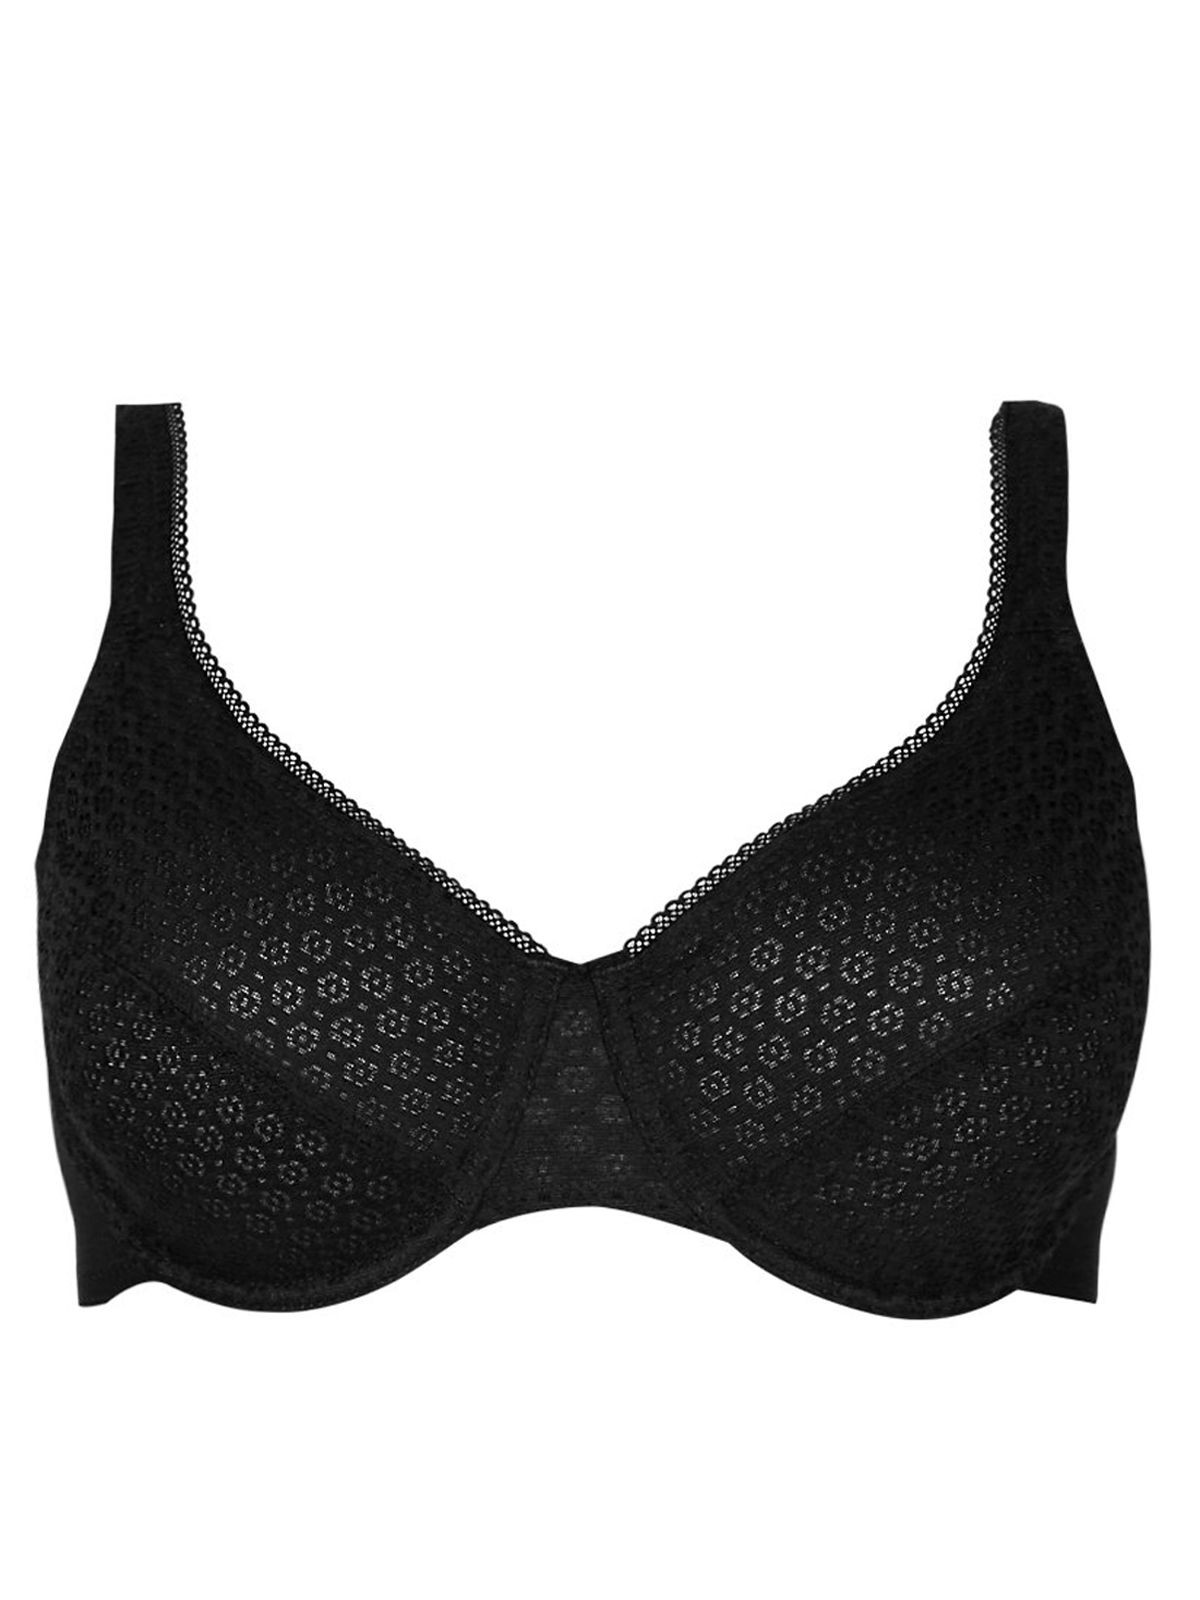 Marks and Spencer - - M&5 BLACK Geo Lace Minimiser Full Cup Bra - Size ...